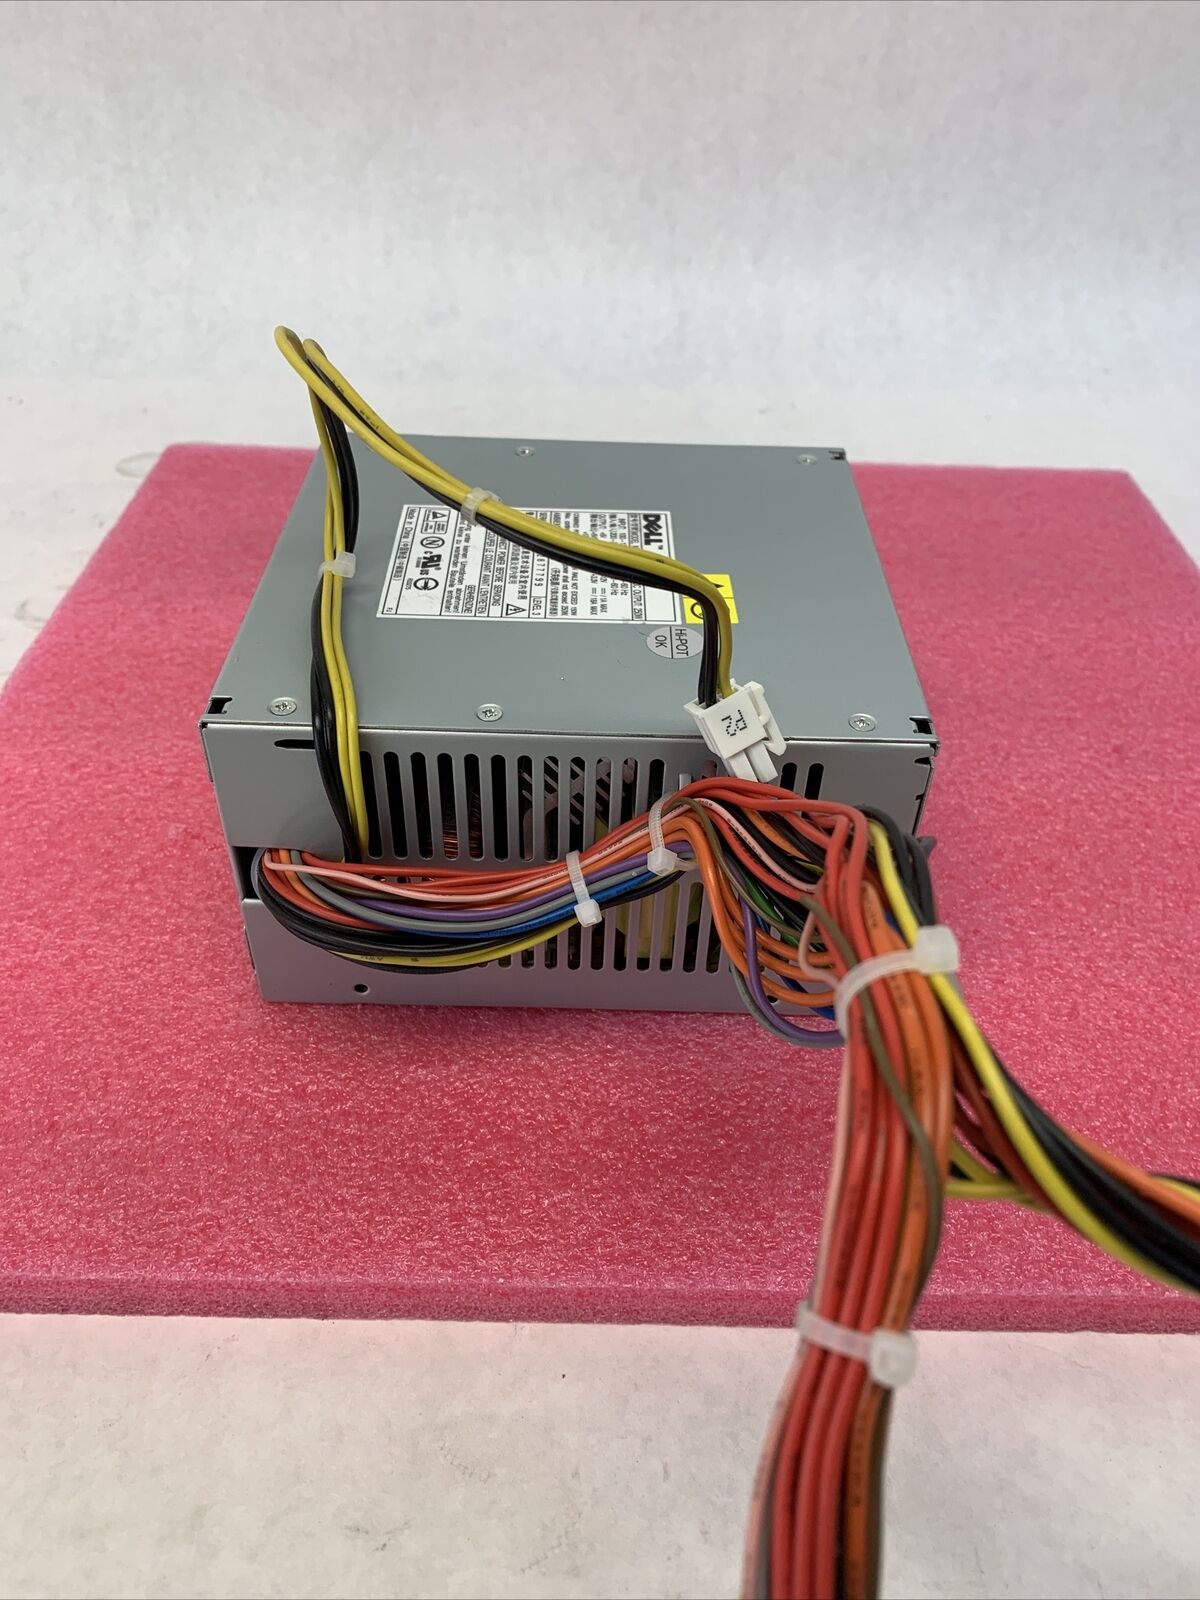 Dell PS-5212DS M0148 250W Power Supply